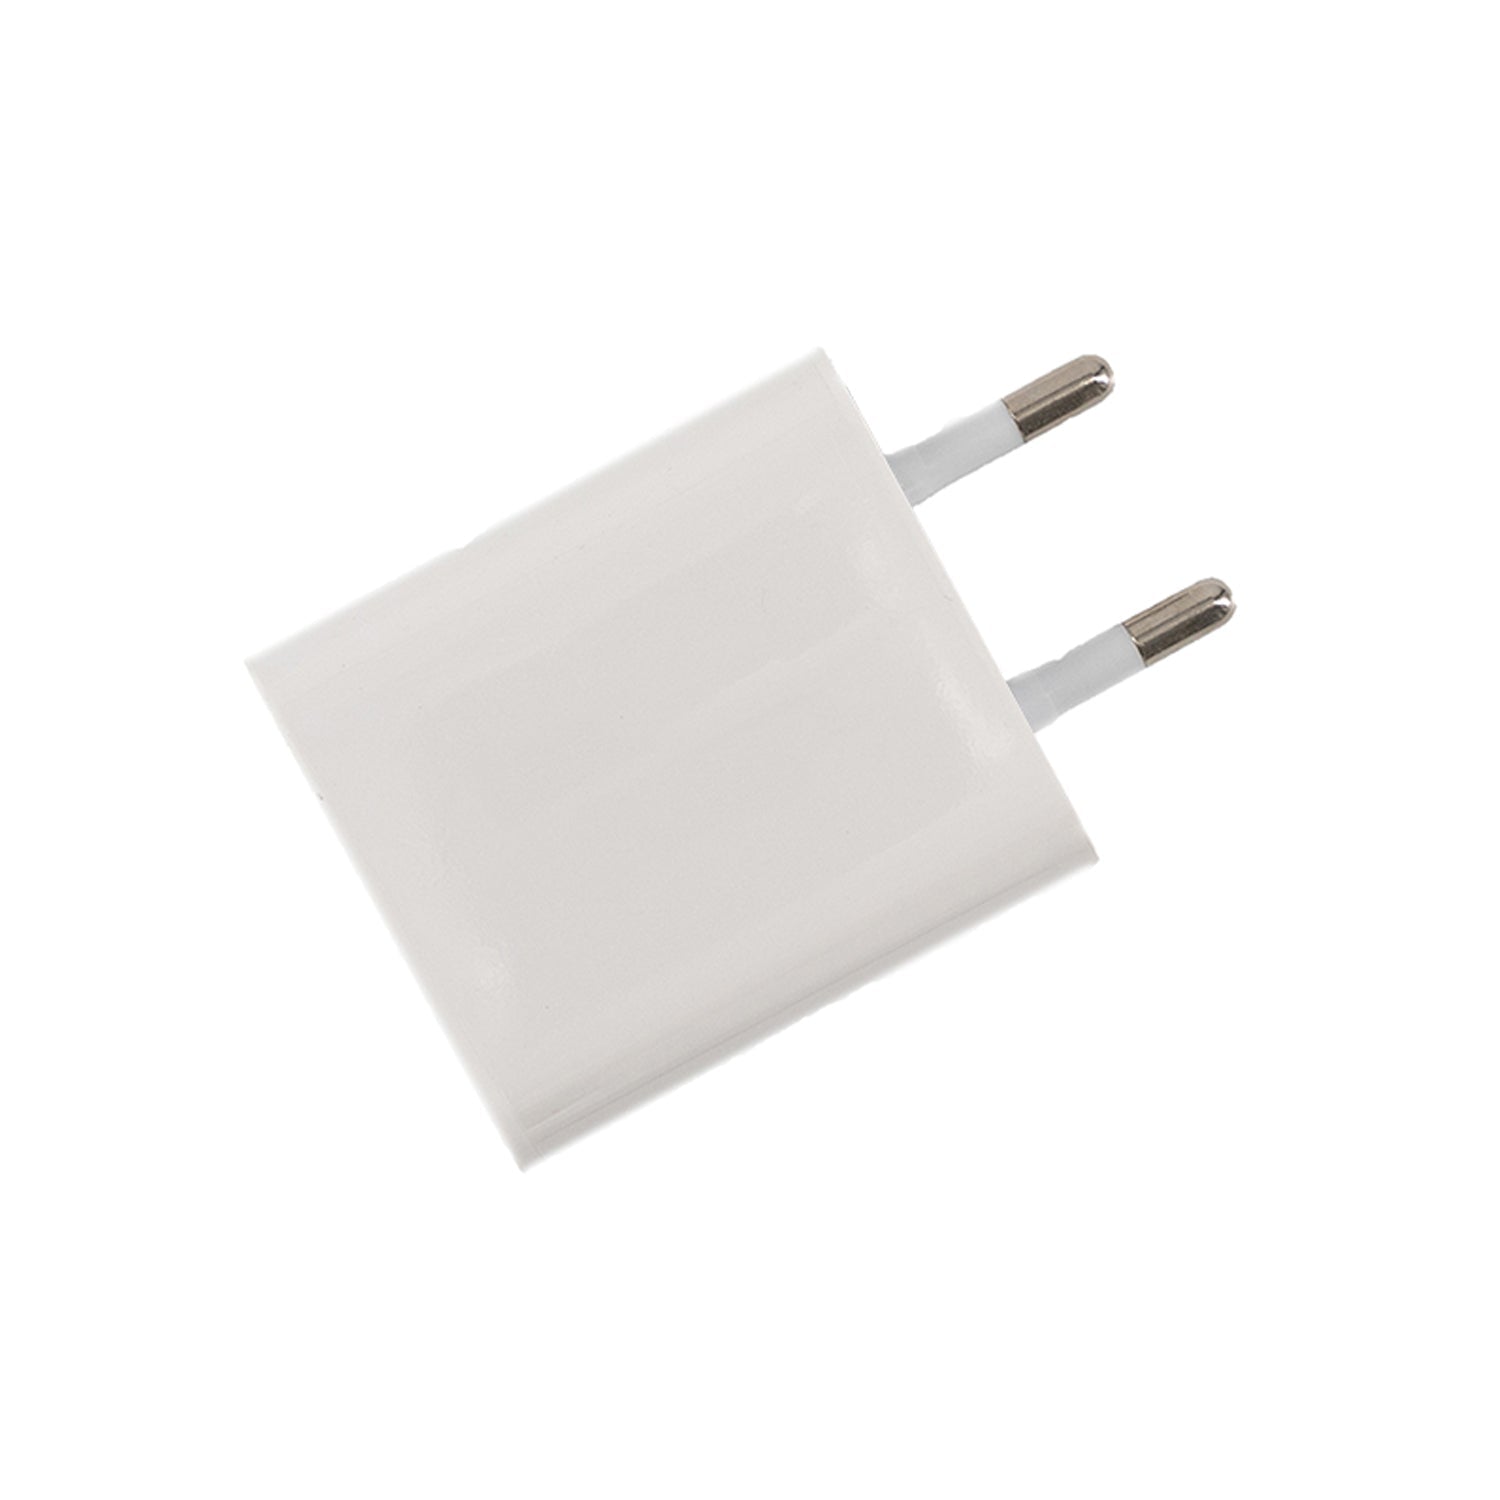 6103 USB Fast Charger Adapter (Adapter Only)